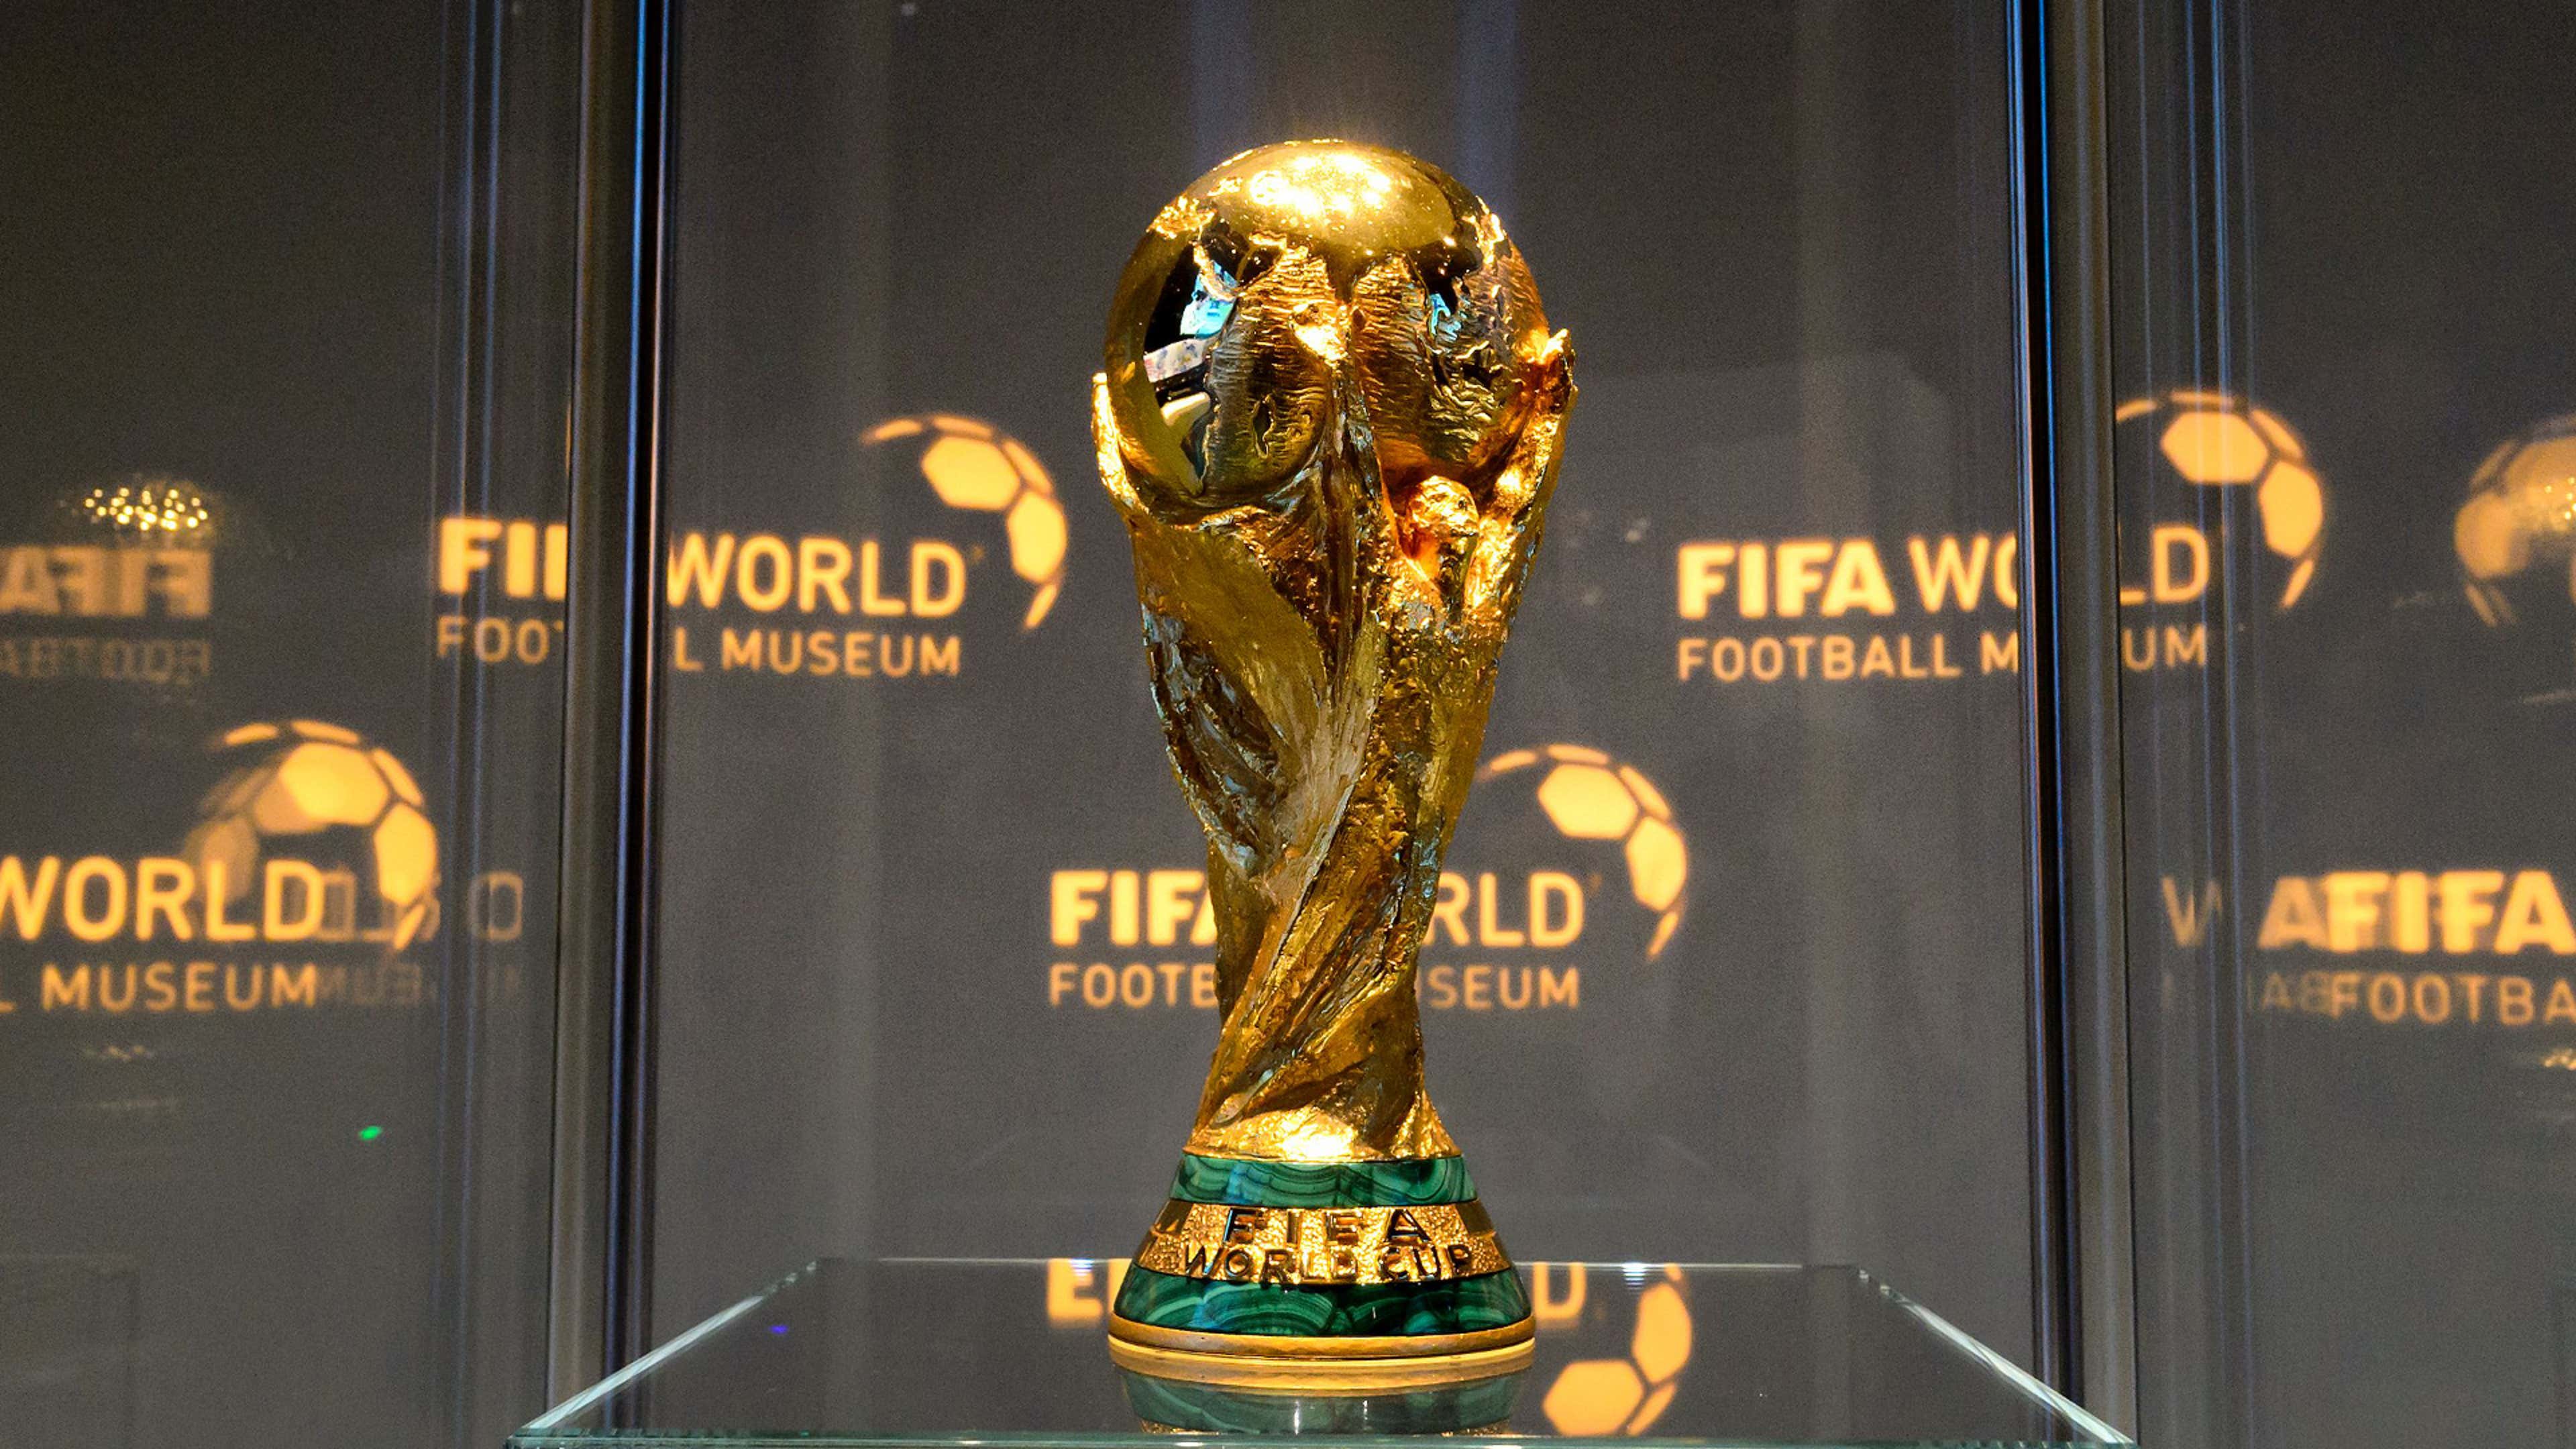 FIFA World Cup 2022 Countdown: From Jules Rimet to FIFA World Cup